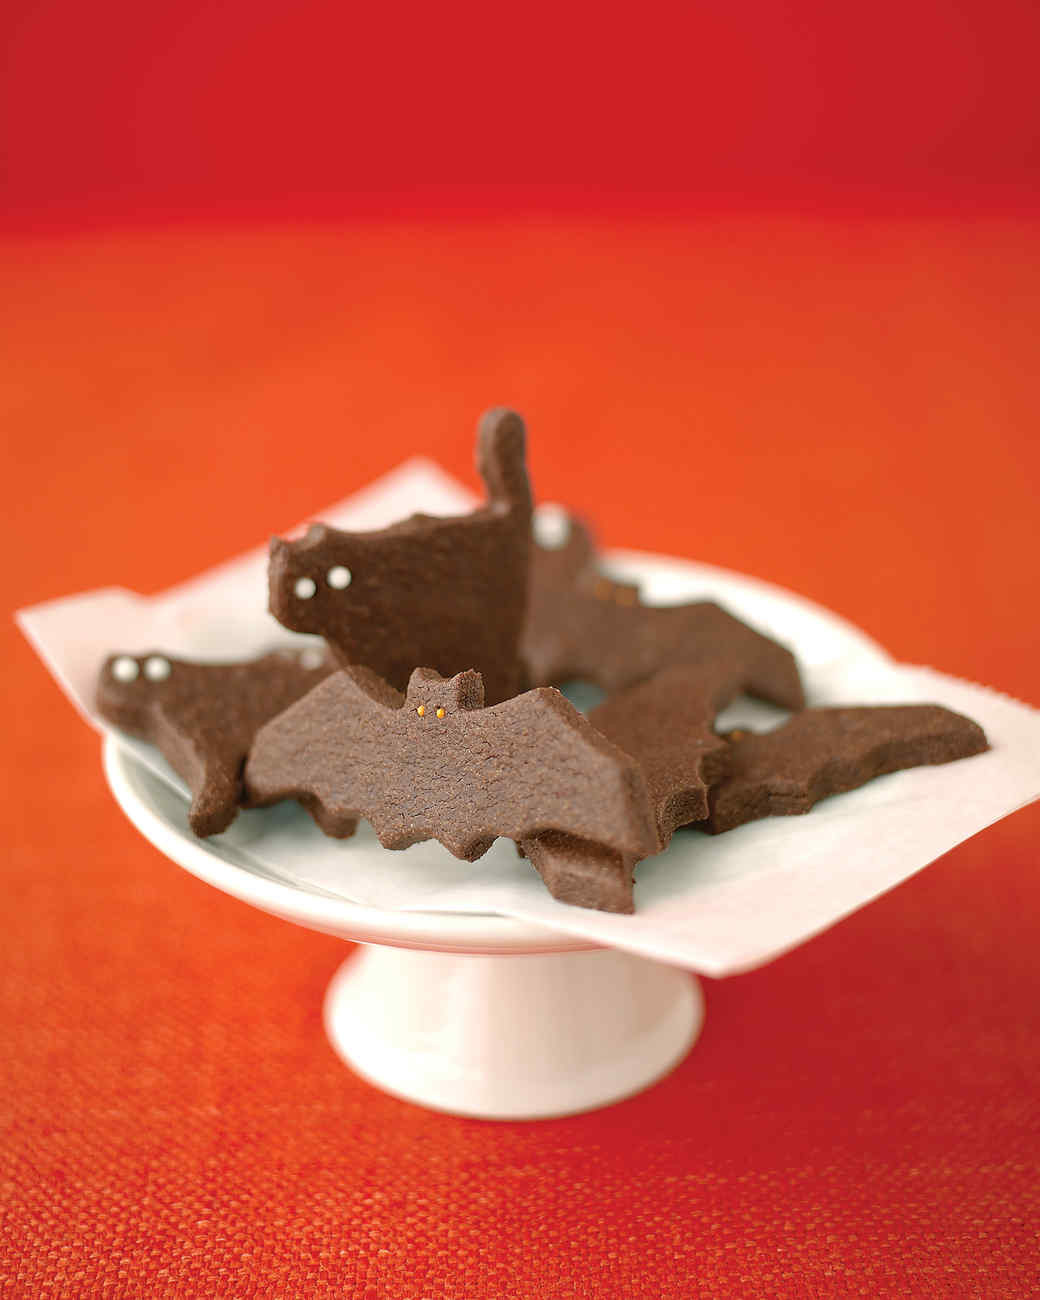 Recipes For Halloween Cookies
 Ghostly Bat and Cat Cookies Recipe